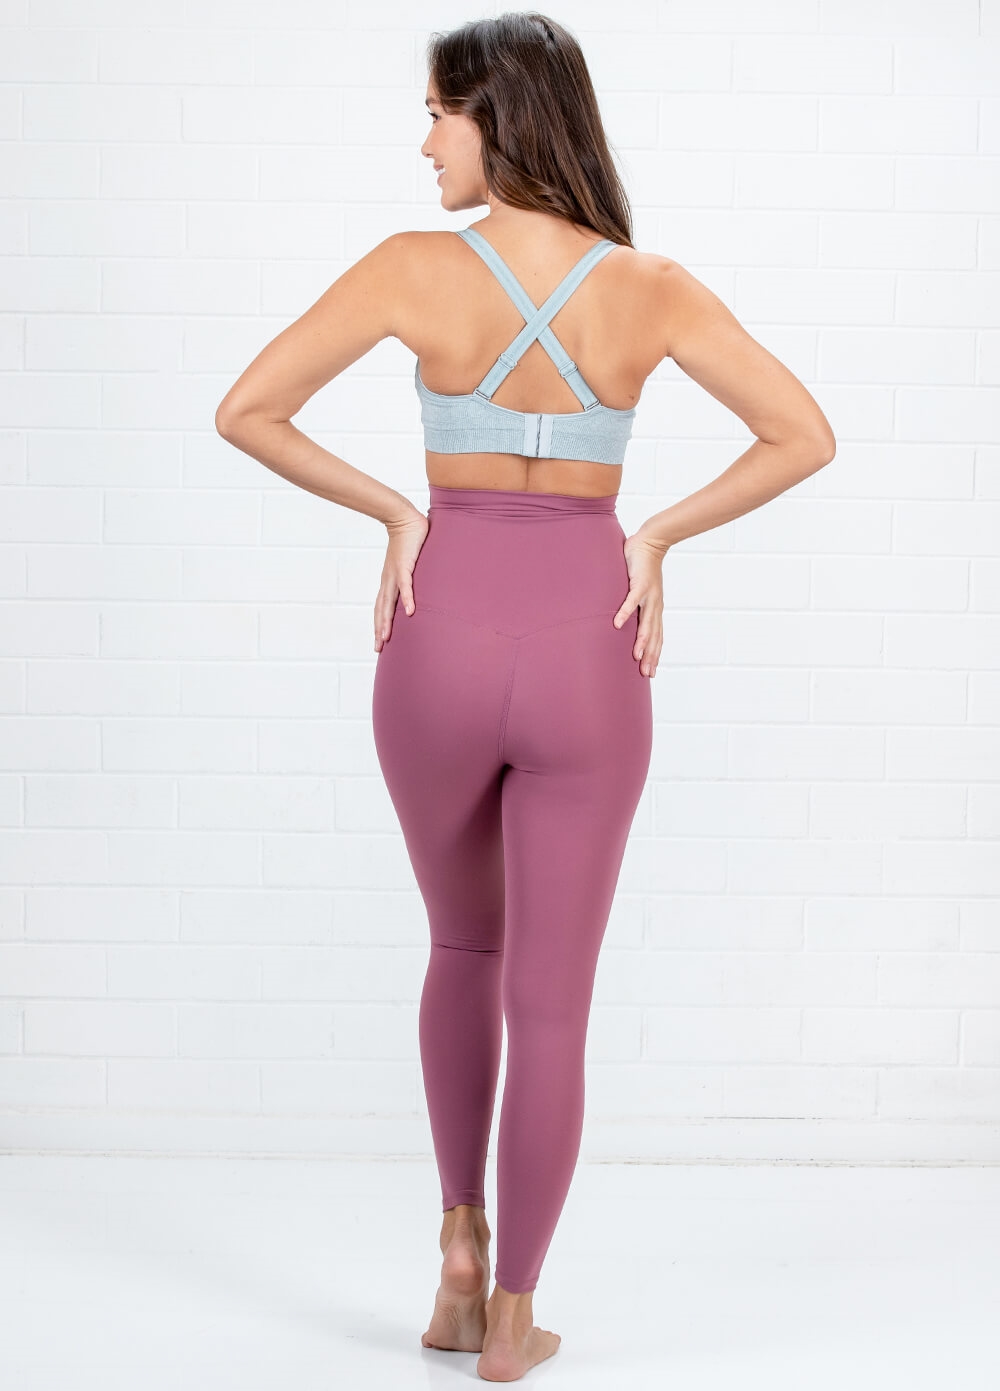 Queen Bee - Jenna High Waist Active Shaping Tights in Persian Rose